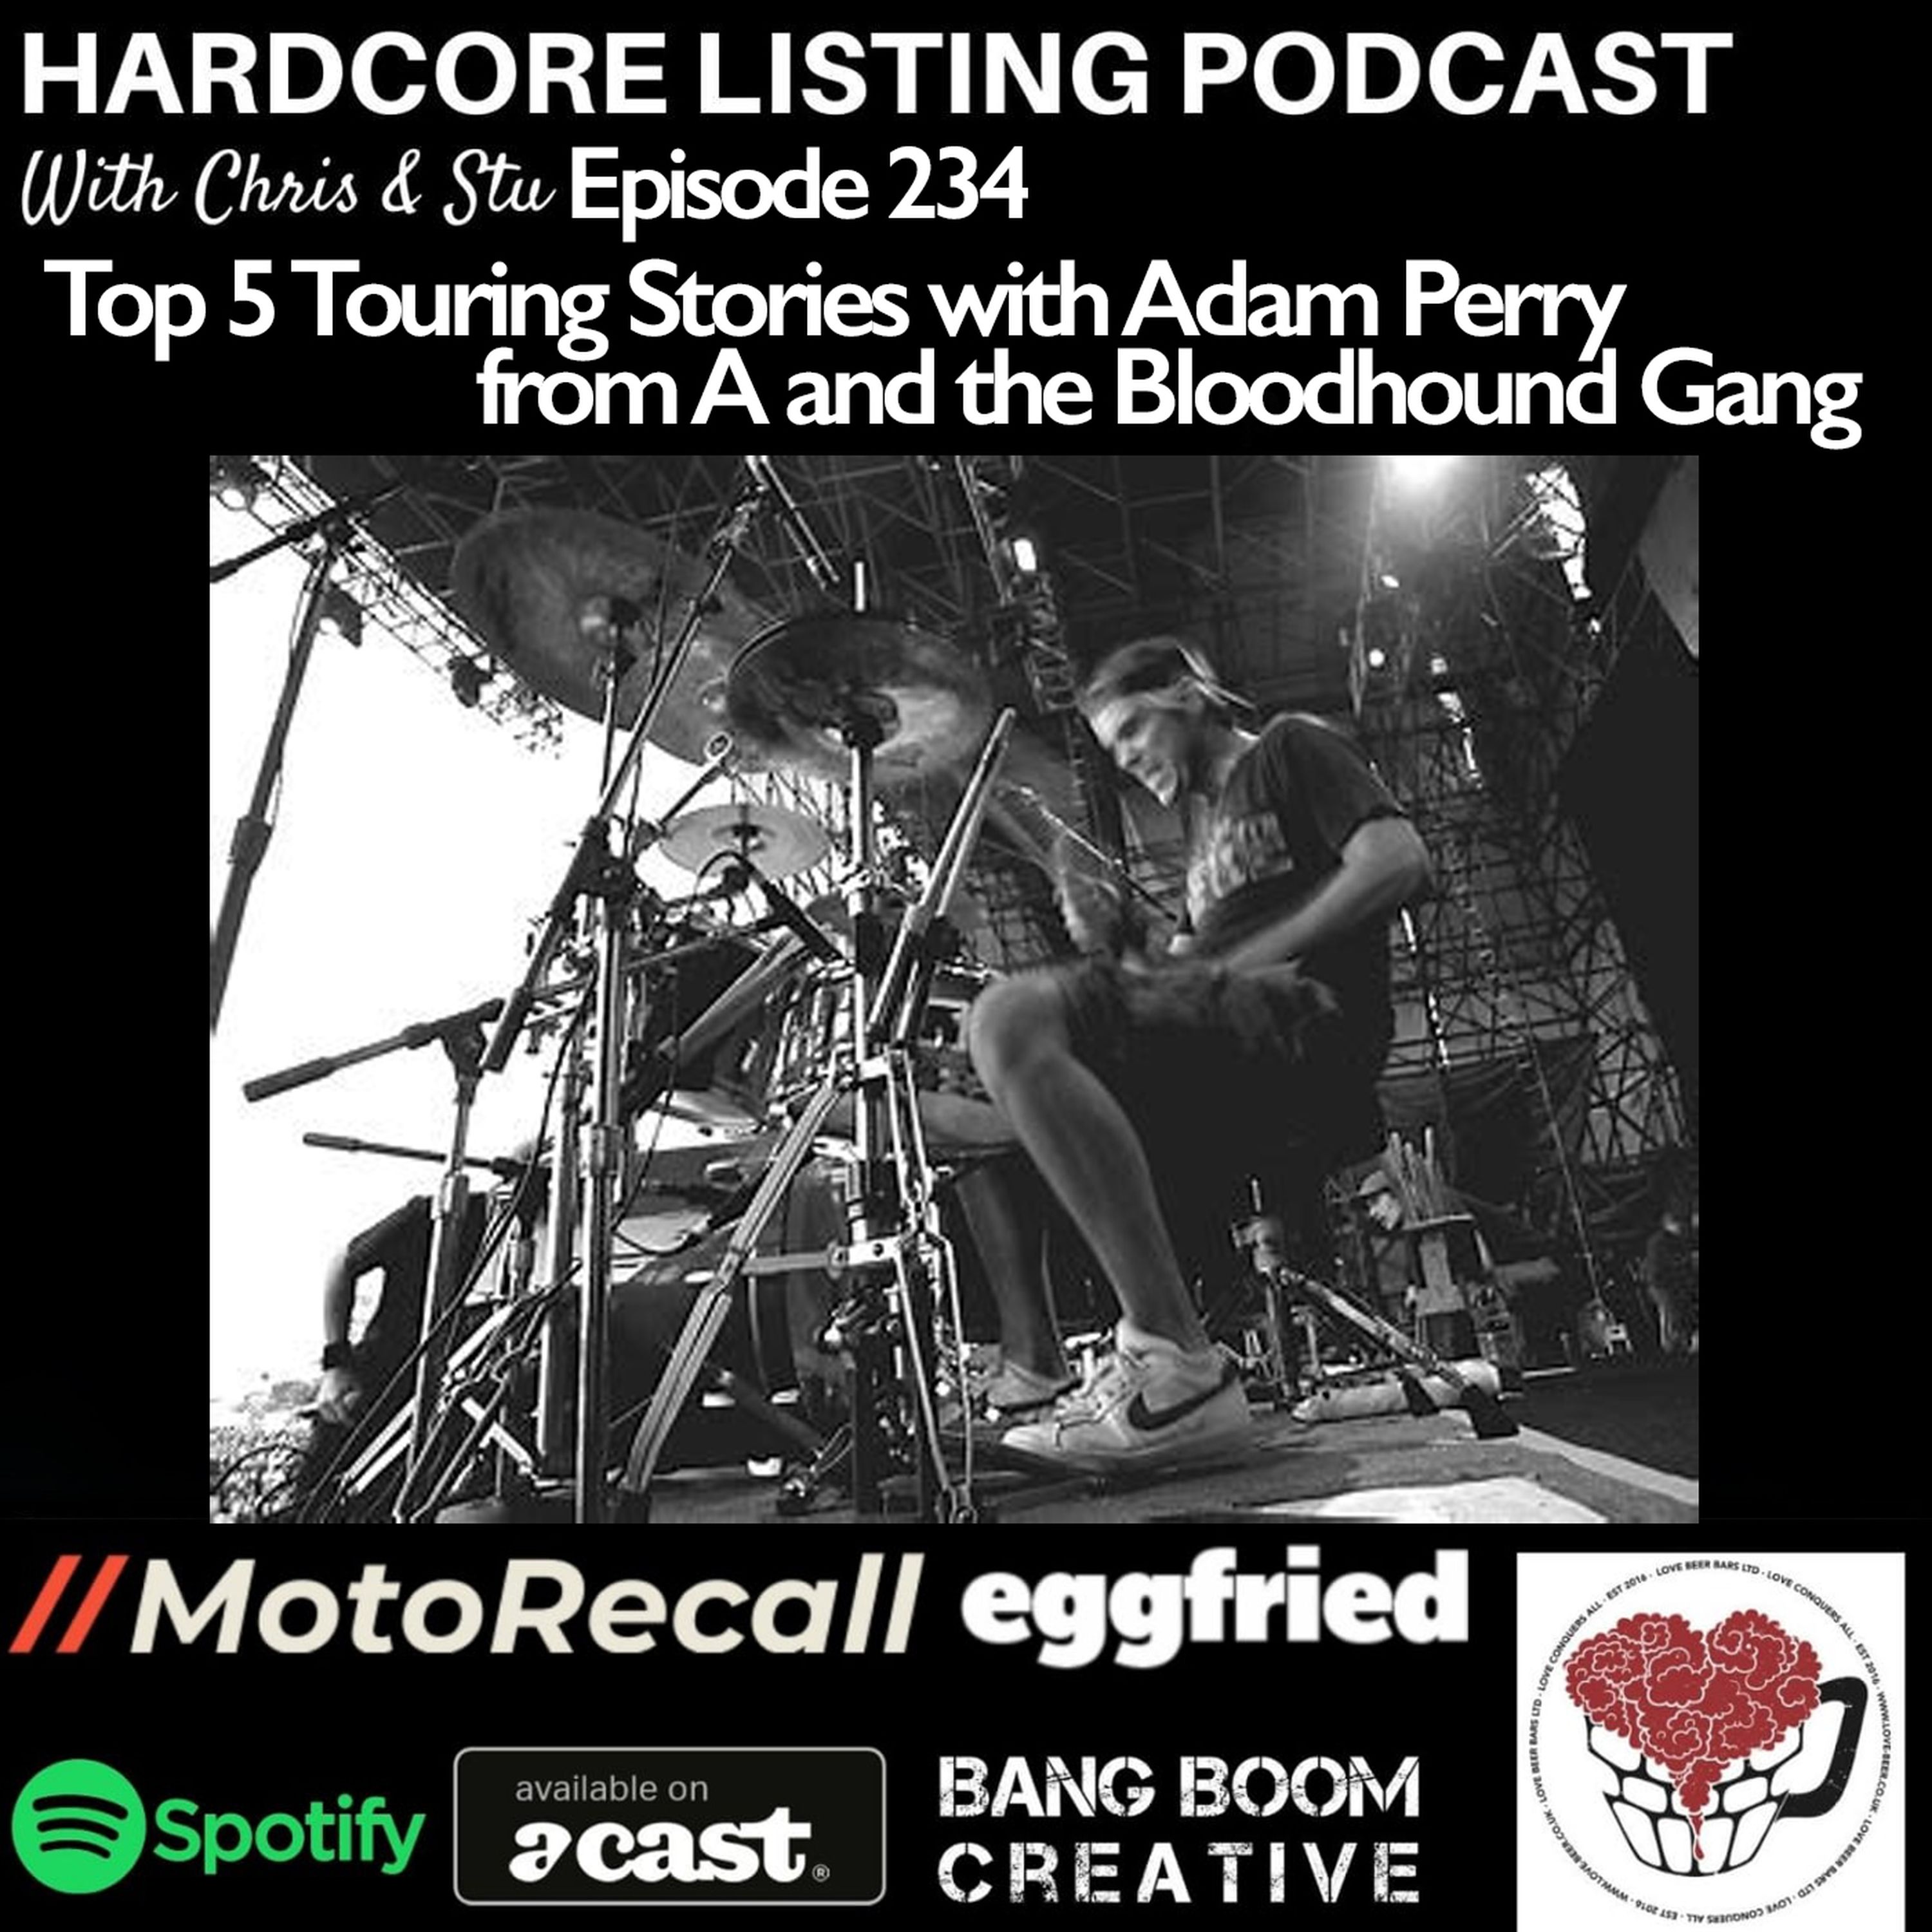 Top 5 Touring Stories with Adam Perry from A and the Bloodhound Gang